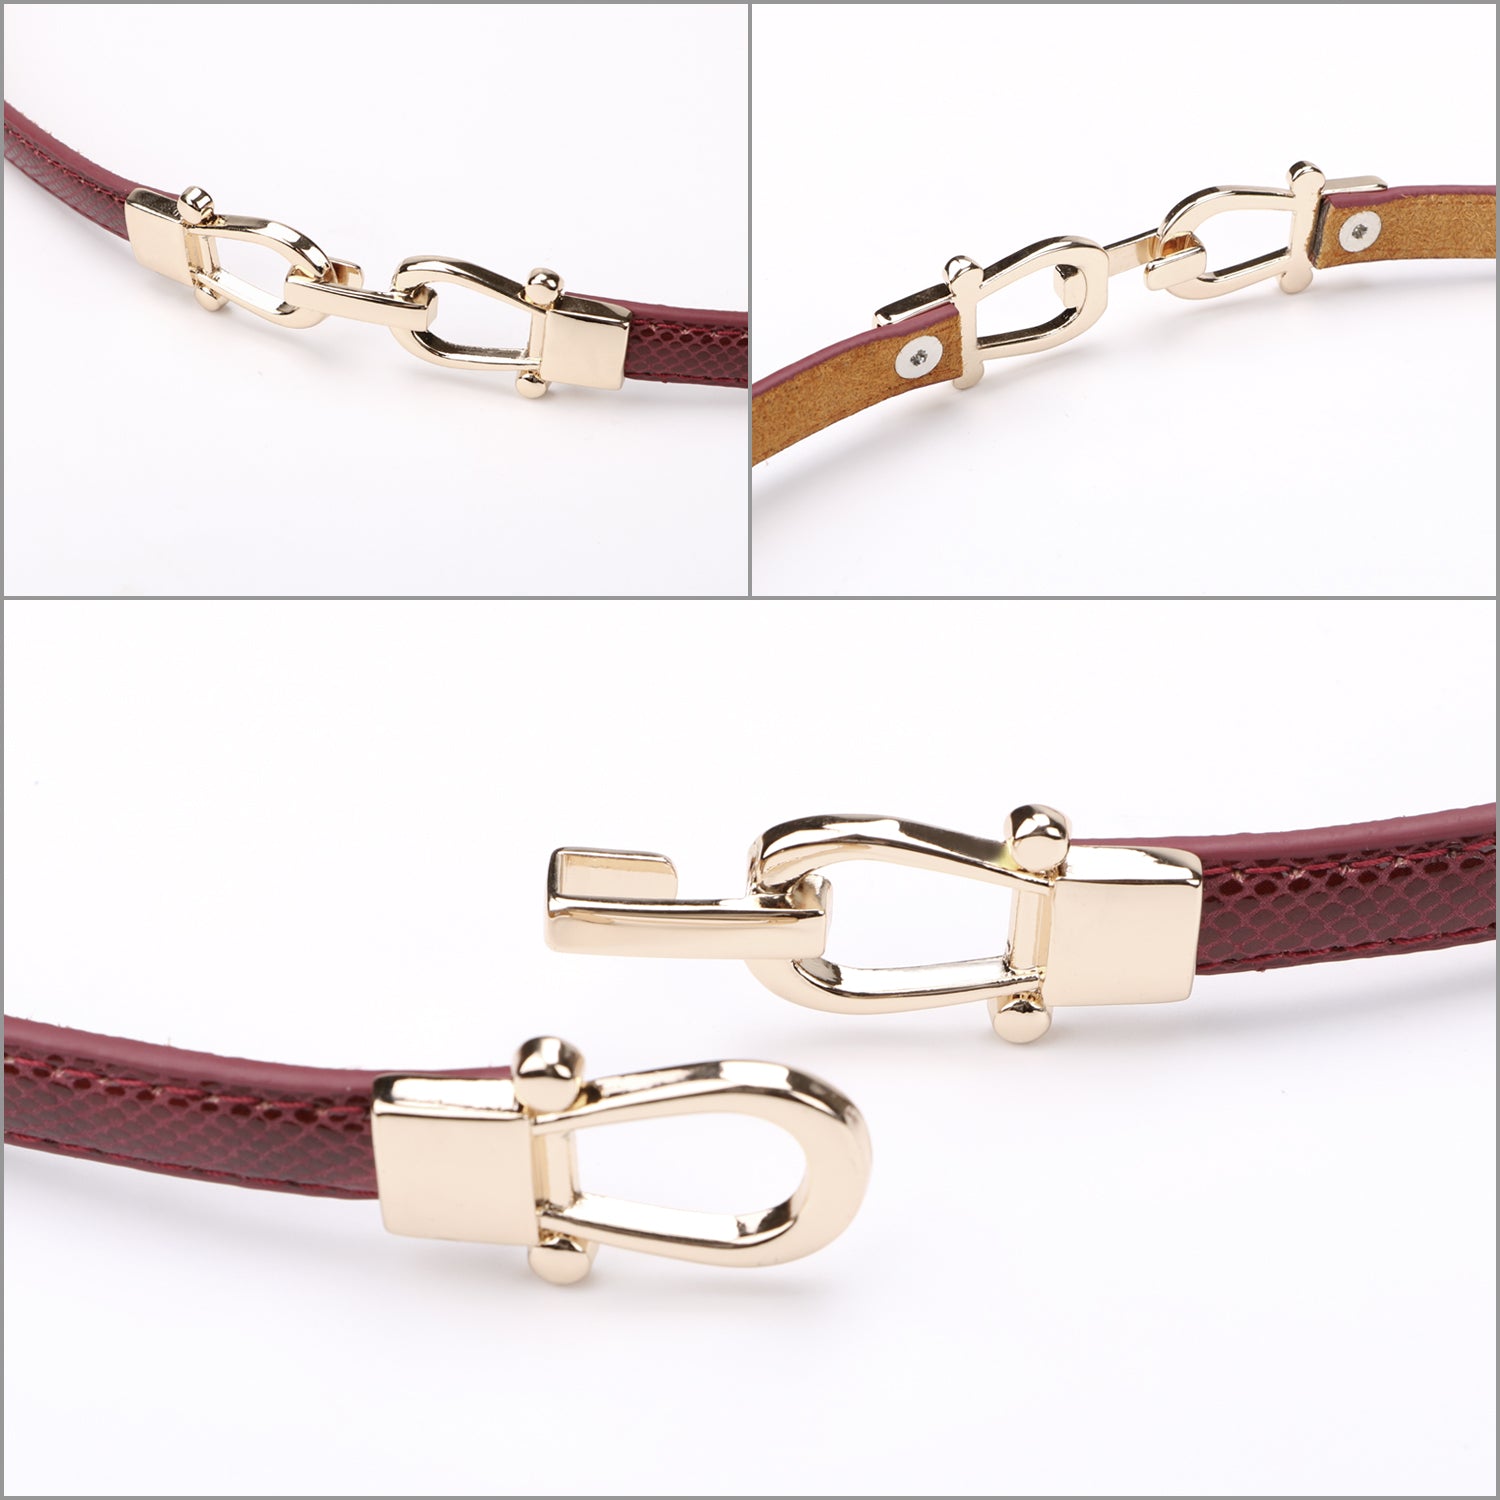 Women' Business Ideal Smart Belt - Red Leather NORA GARDNER | OFFICIAL STORE for work and office